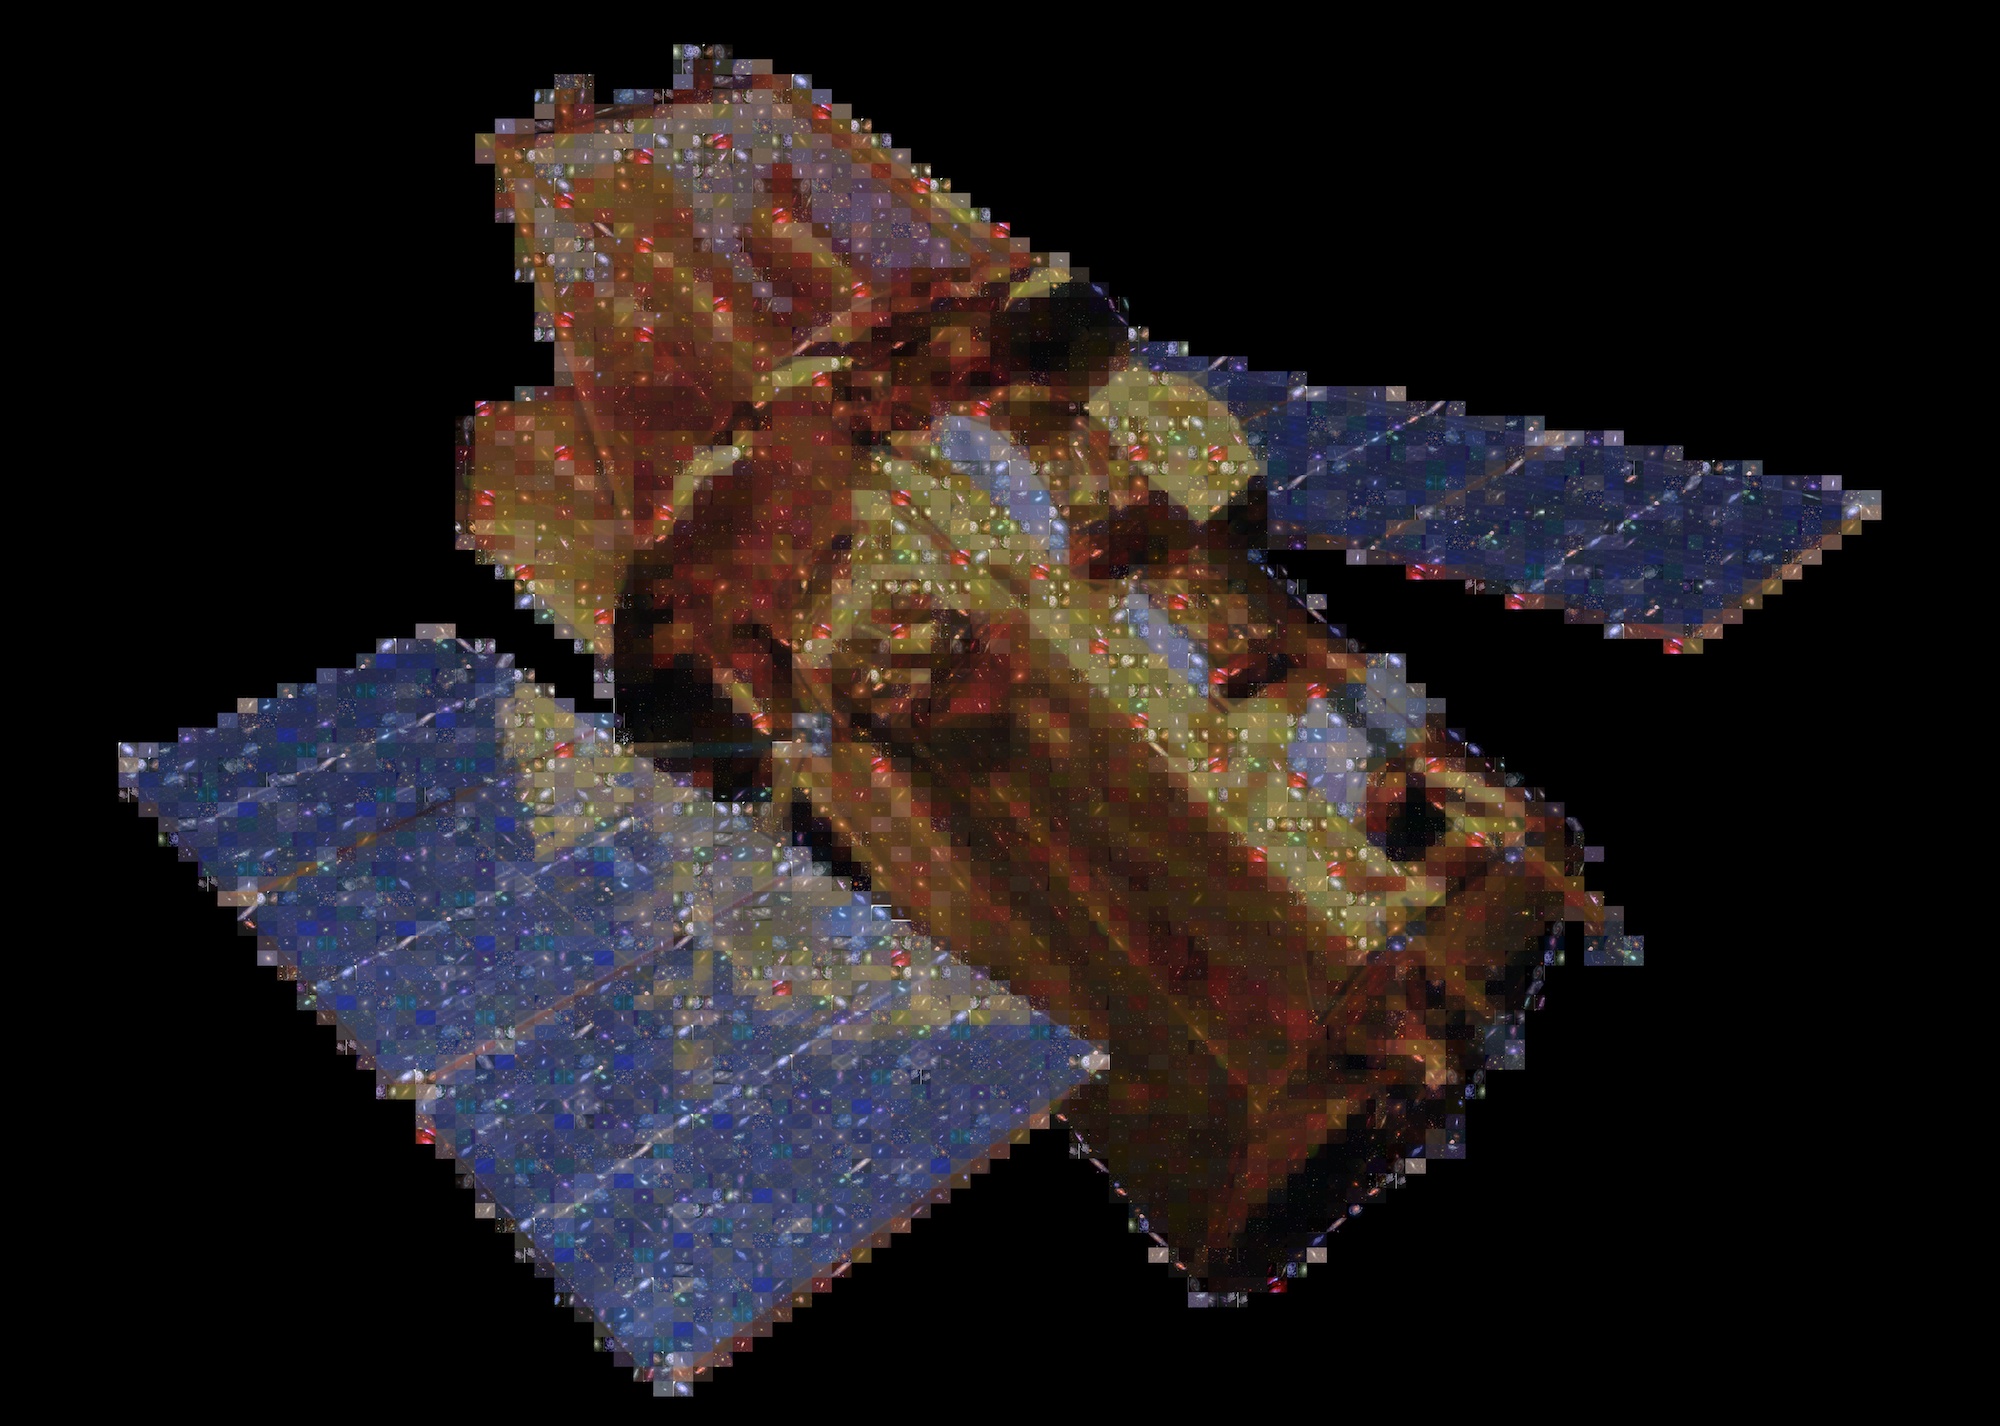 When taking this image as a whole, it looks like the Neil Gehrels Swift Observatory, a telescope with a central cylindrical body and solar panels on either side. Upon closer inspection, though, the image is made from small individual images of different astronomical objects that were taken by the telescope.